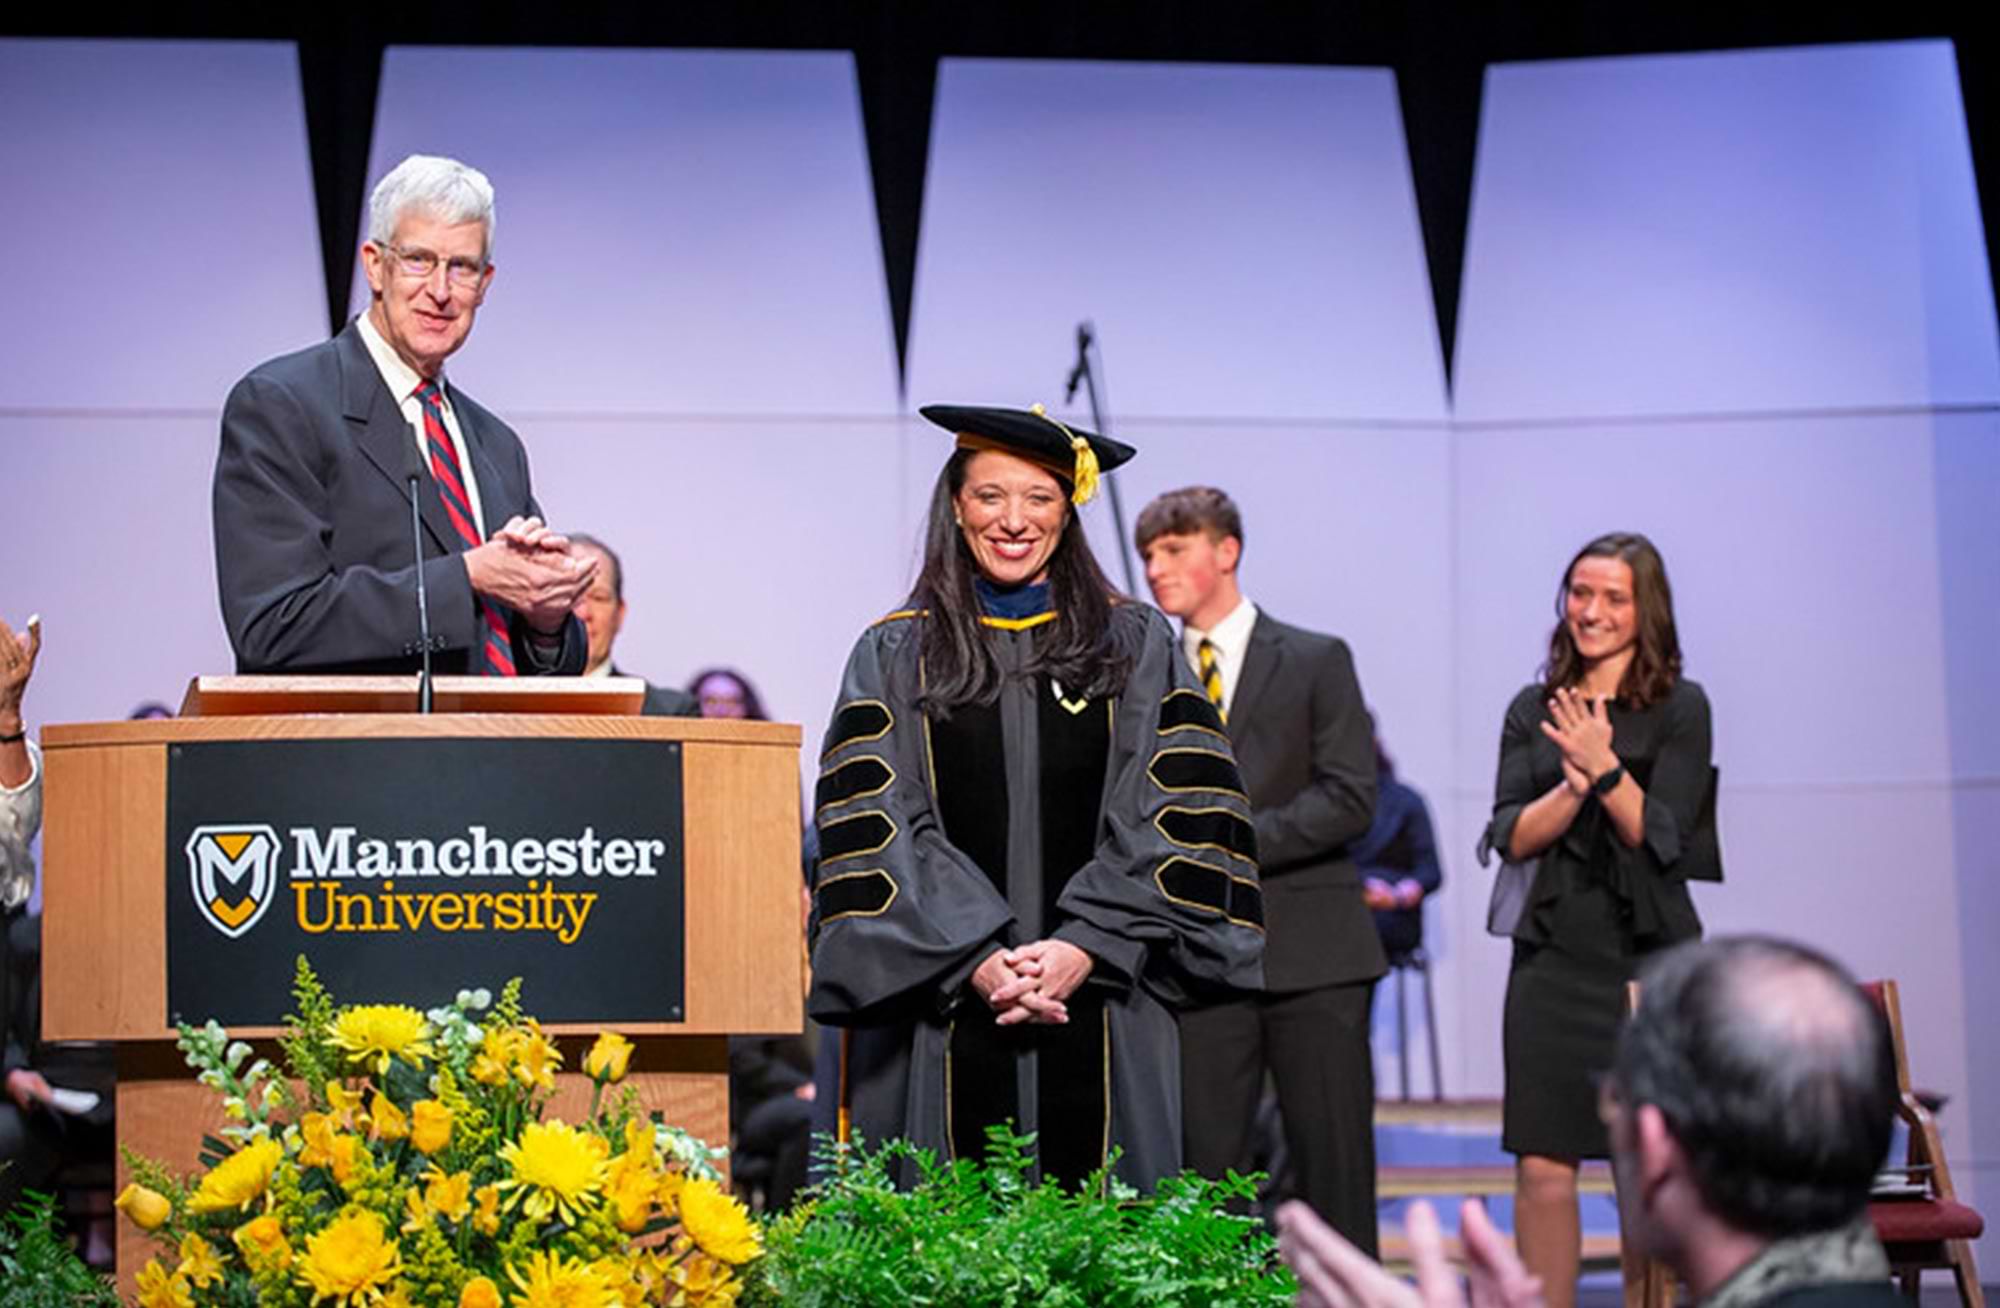 Dr. Stacy Hendricks ’96 Young dressed in full doctoral regalia stands smiling on stage during her inauguration as university president